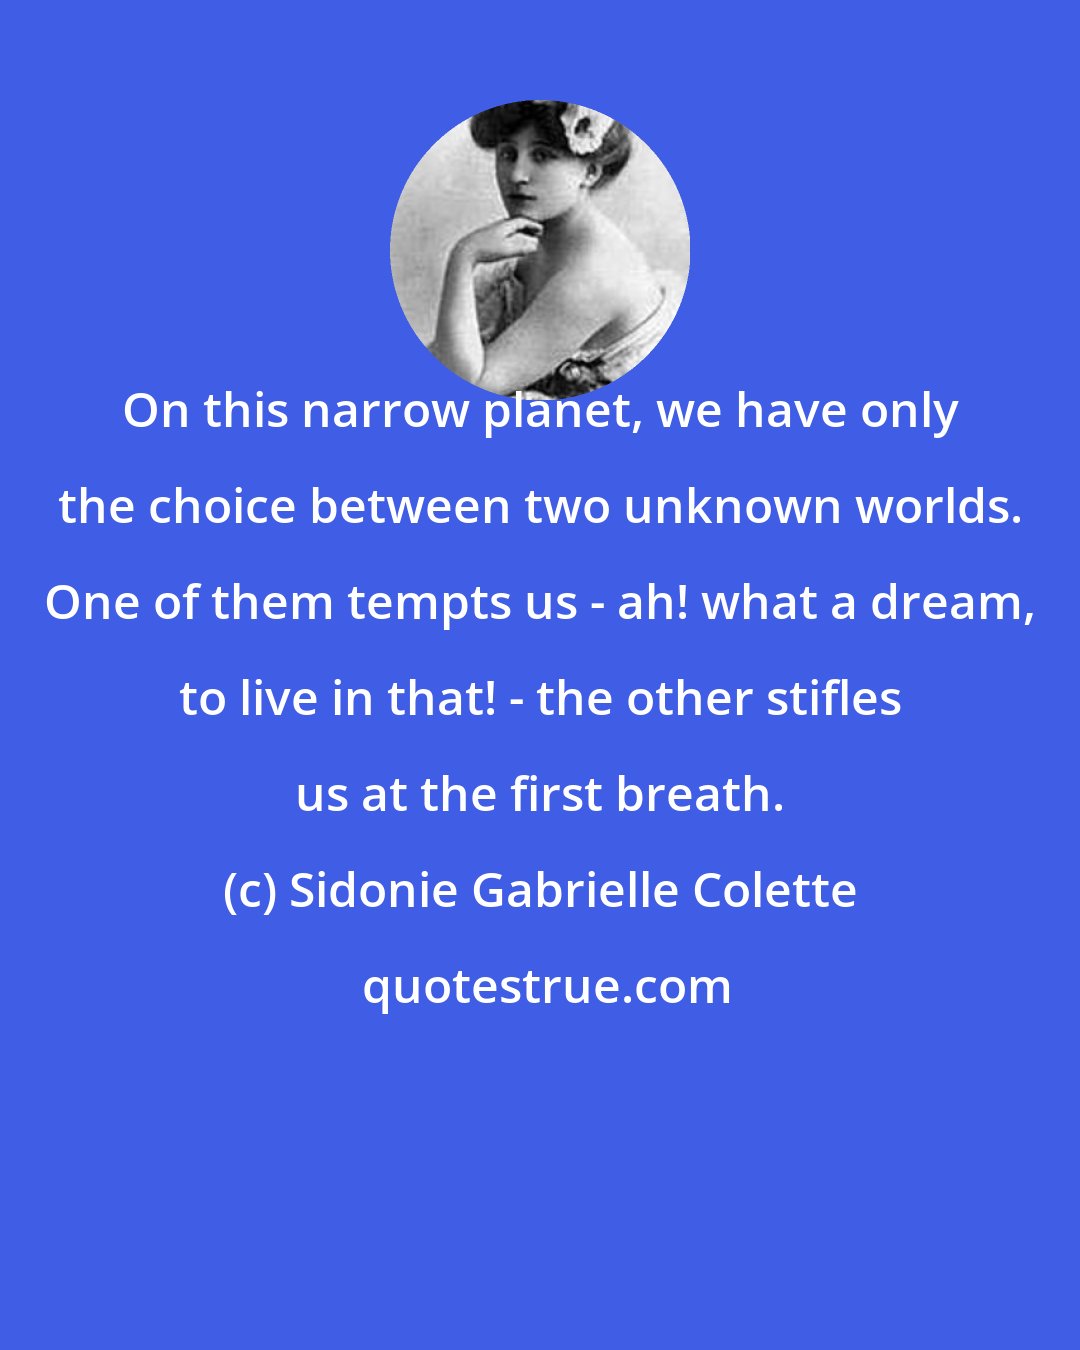 Sidonie Gabrielle Colette: On this narrow planet, we have only the choice between two unknown worlds. One of them tempts us - ah! what a dream, to live in that! - the other stifles us at the first breath.